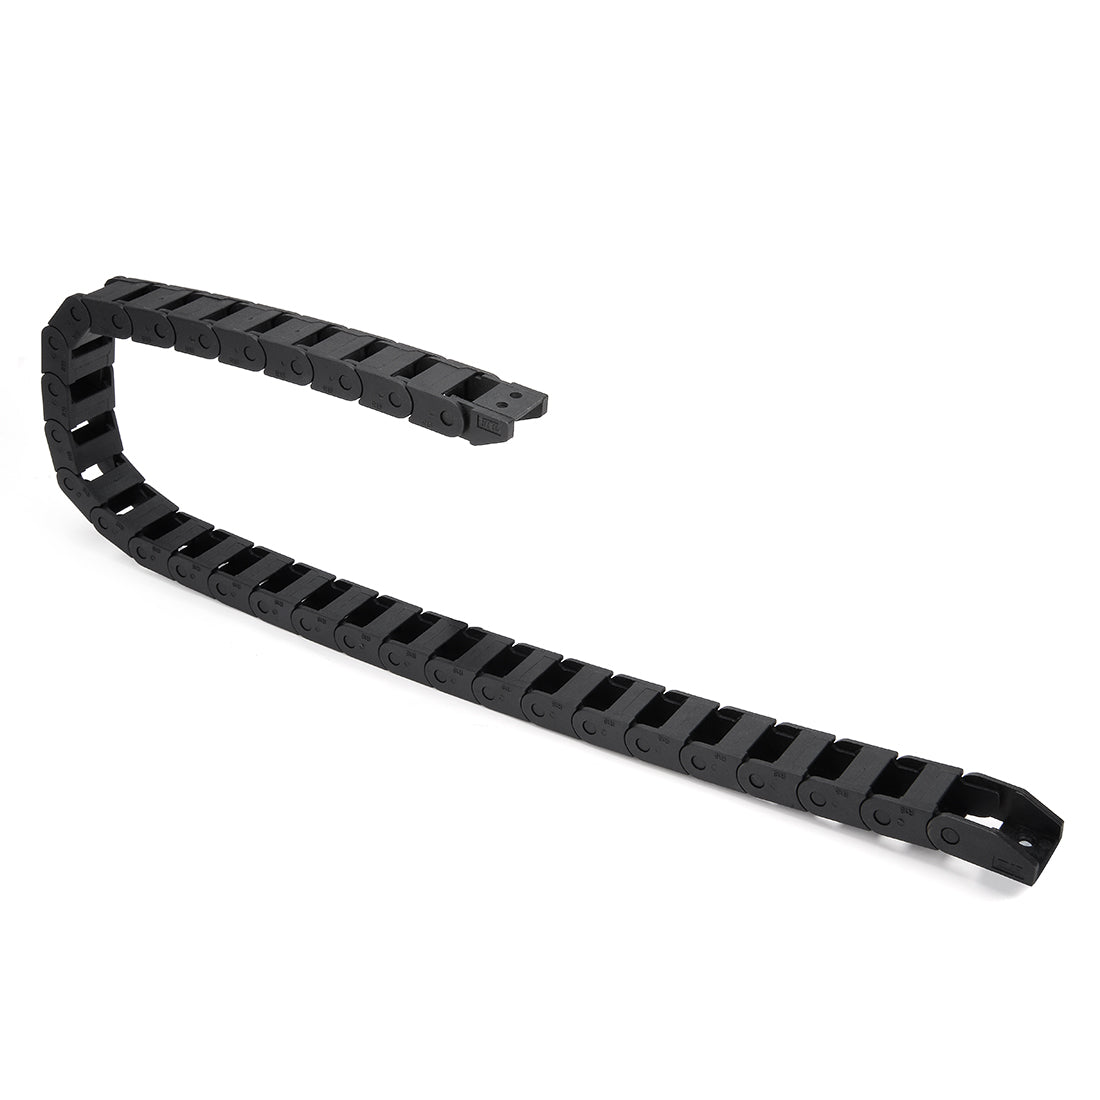 uxcell Uxcell R18 10mm x 15mm Black Plastic Cable Wire Carrier Drag Chain 1M Length for CNC